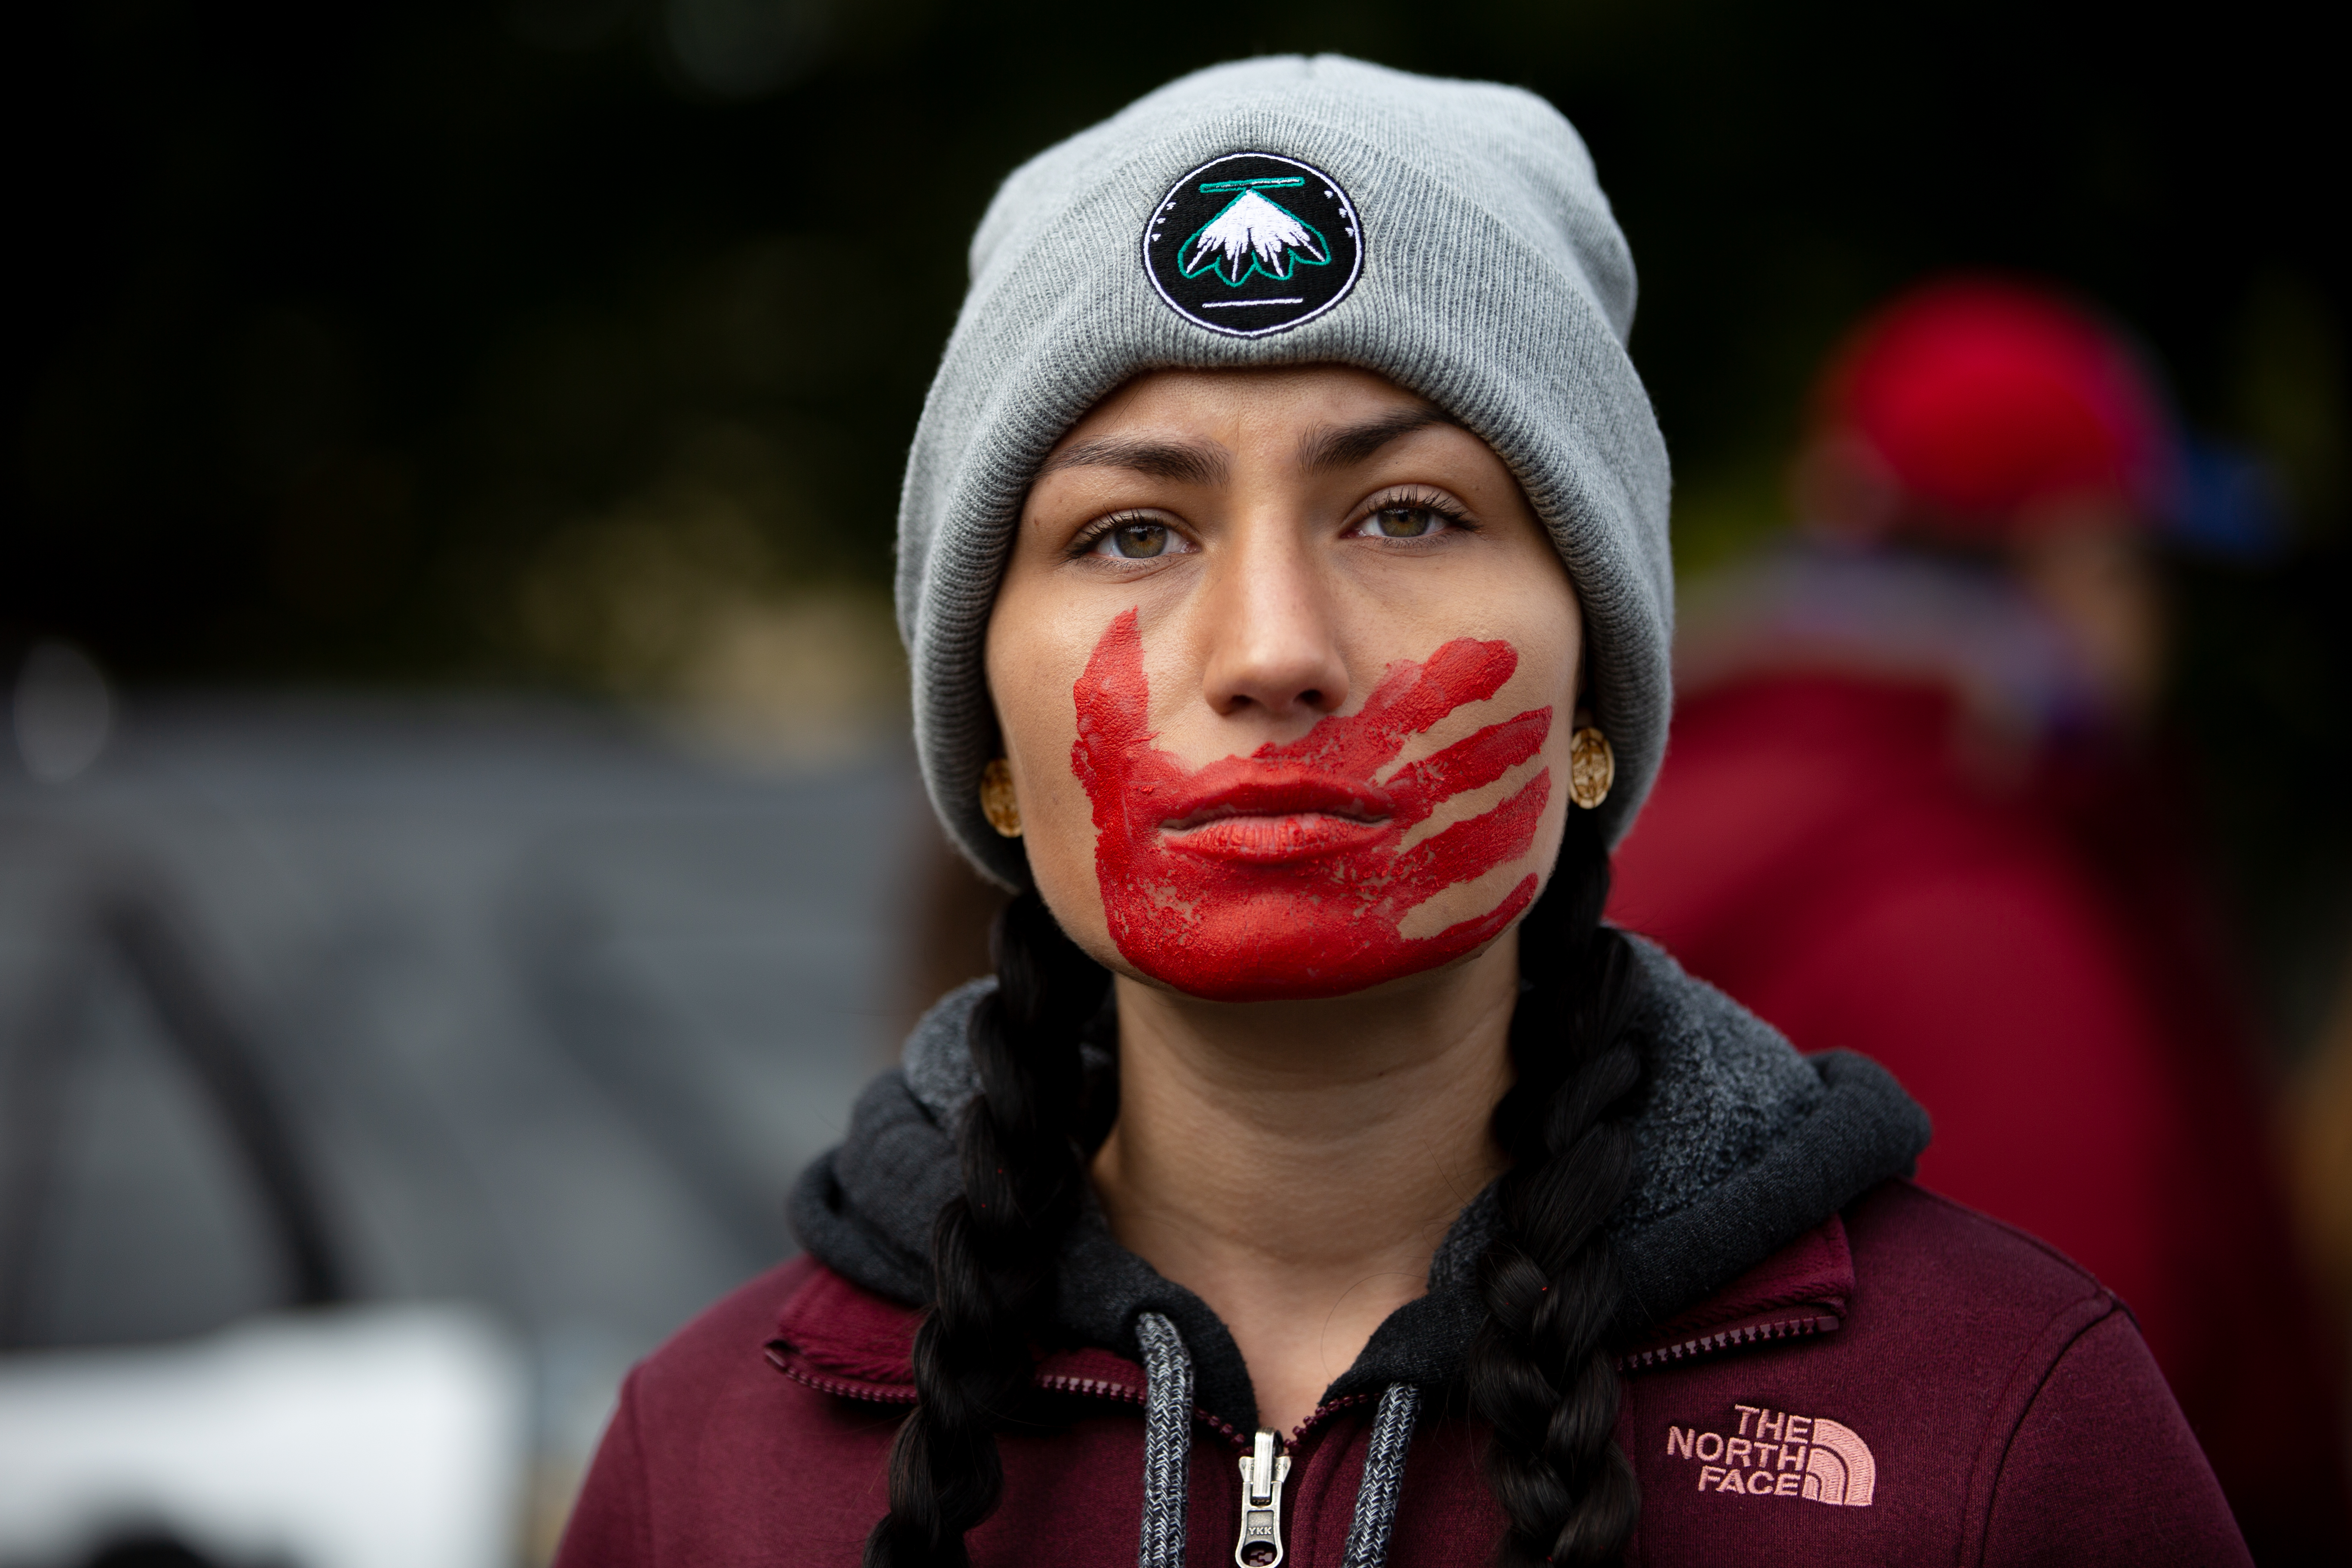 A participant at the Greater Than Fear Rally Rochester Minnesota with a red hand painted across her face